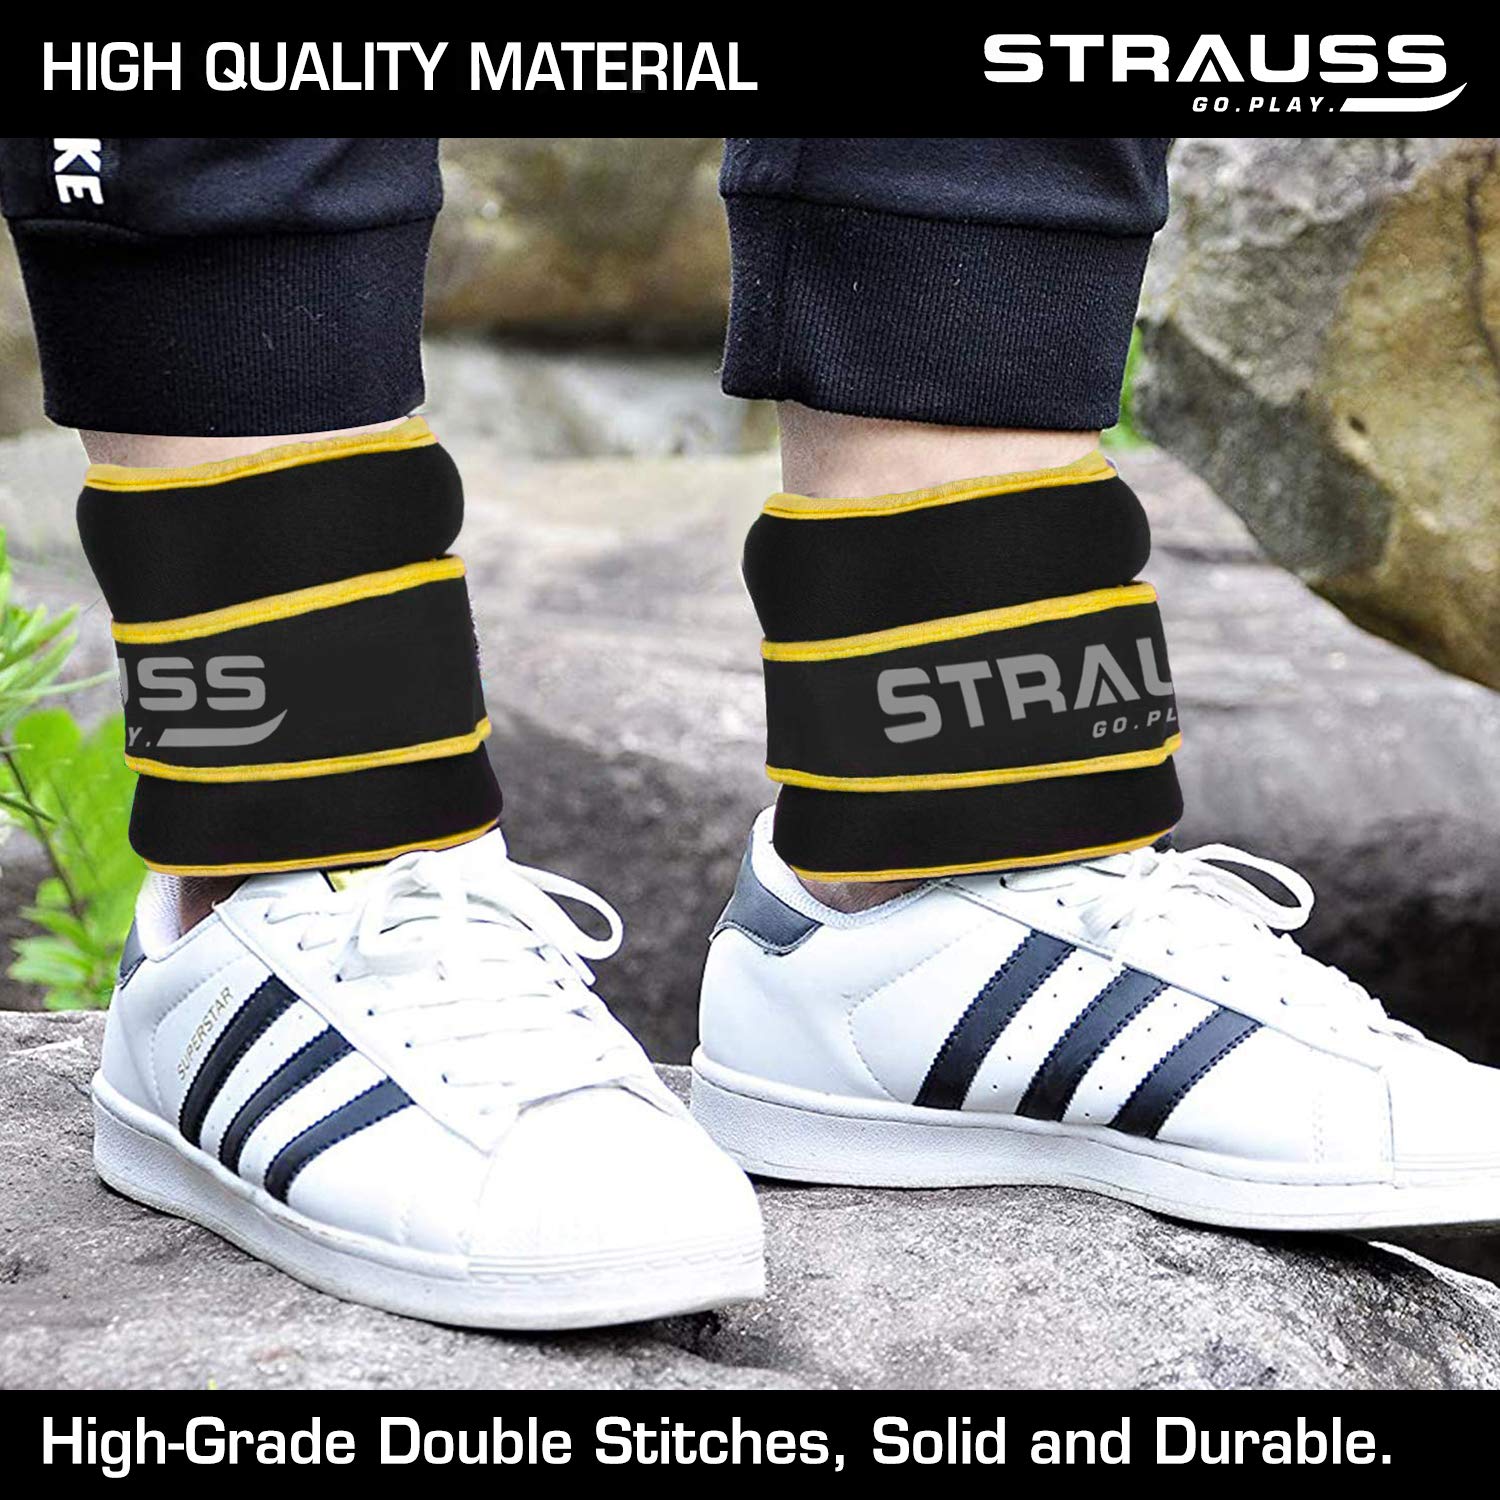 Strauss Round Shape Ankle Weight, 1 Kg (Each), Pair, (Yellow)